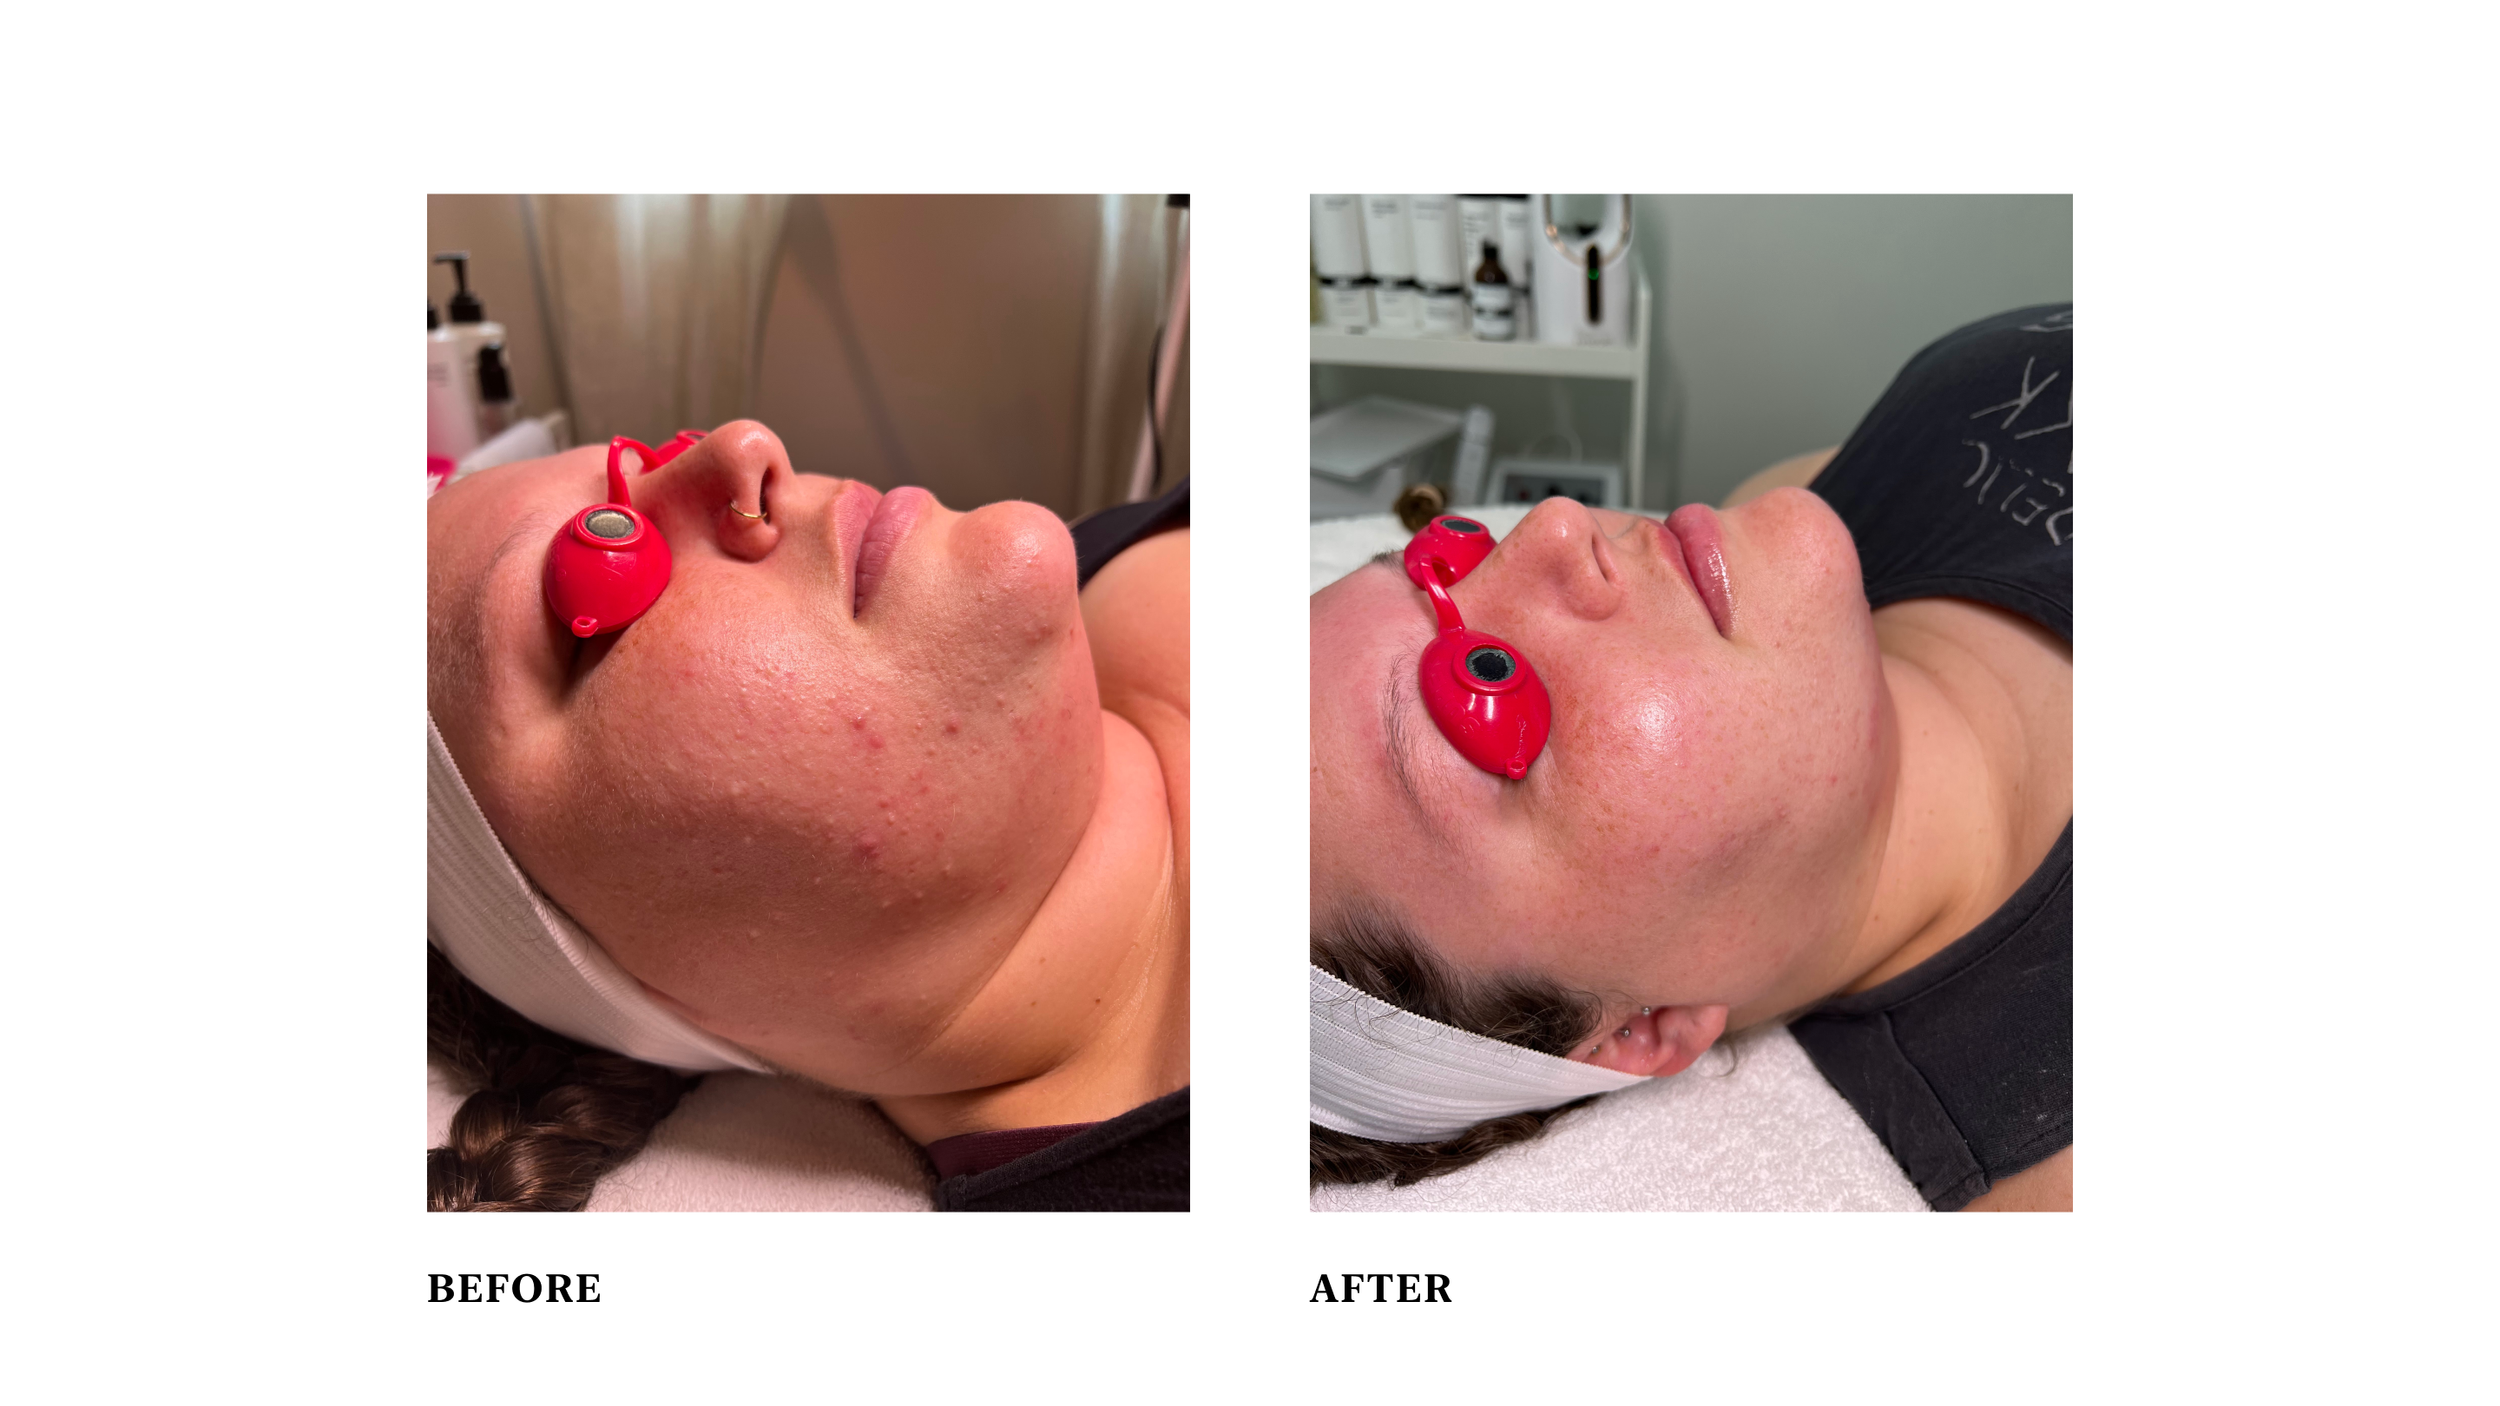  Condition: inflammation, oily, hyperkeratotic build-up  Treatment: customized facials, peels, and consistent home regimen with PCA products 